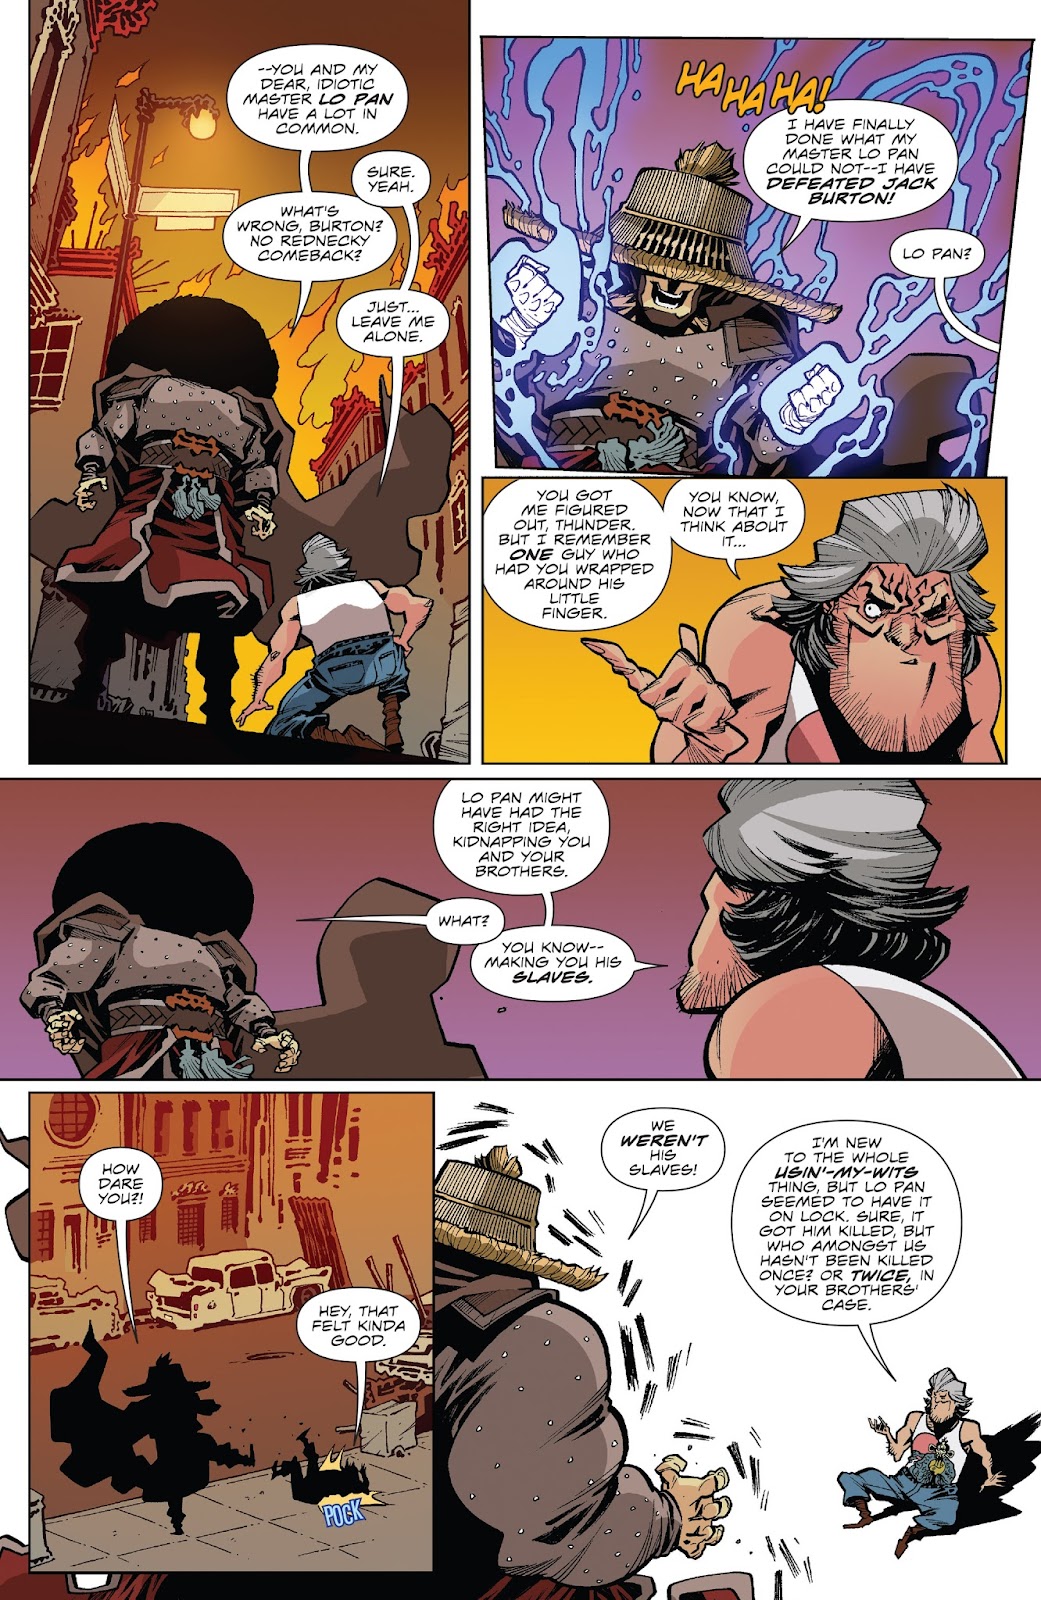 Big Trouble in Little China: Old Man Jack issue 6 - Page 13